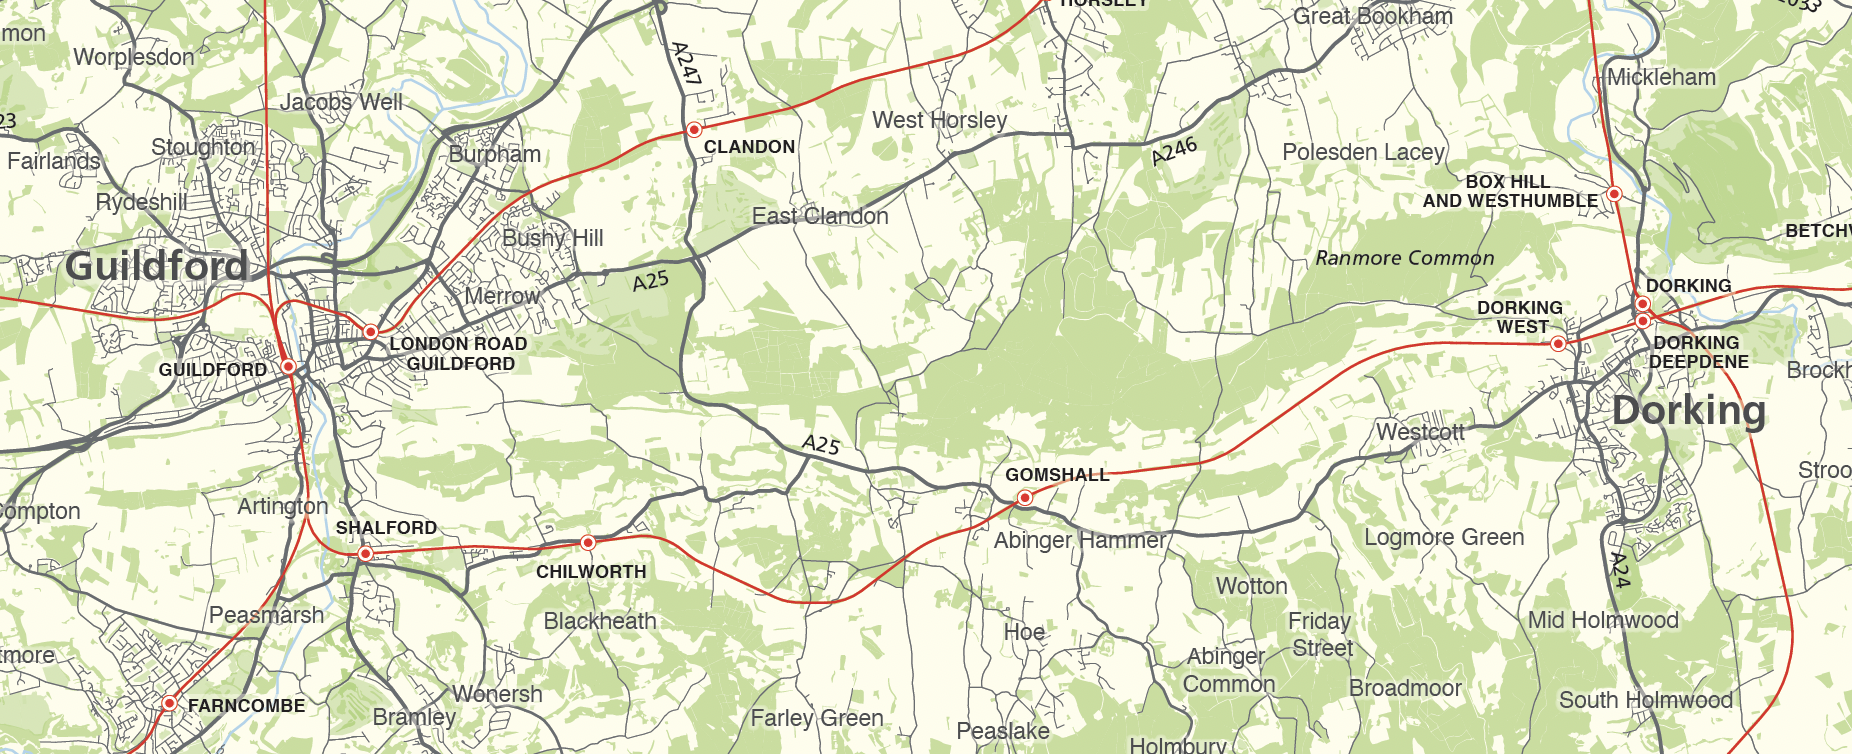 Detail from Surrey county map